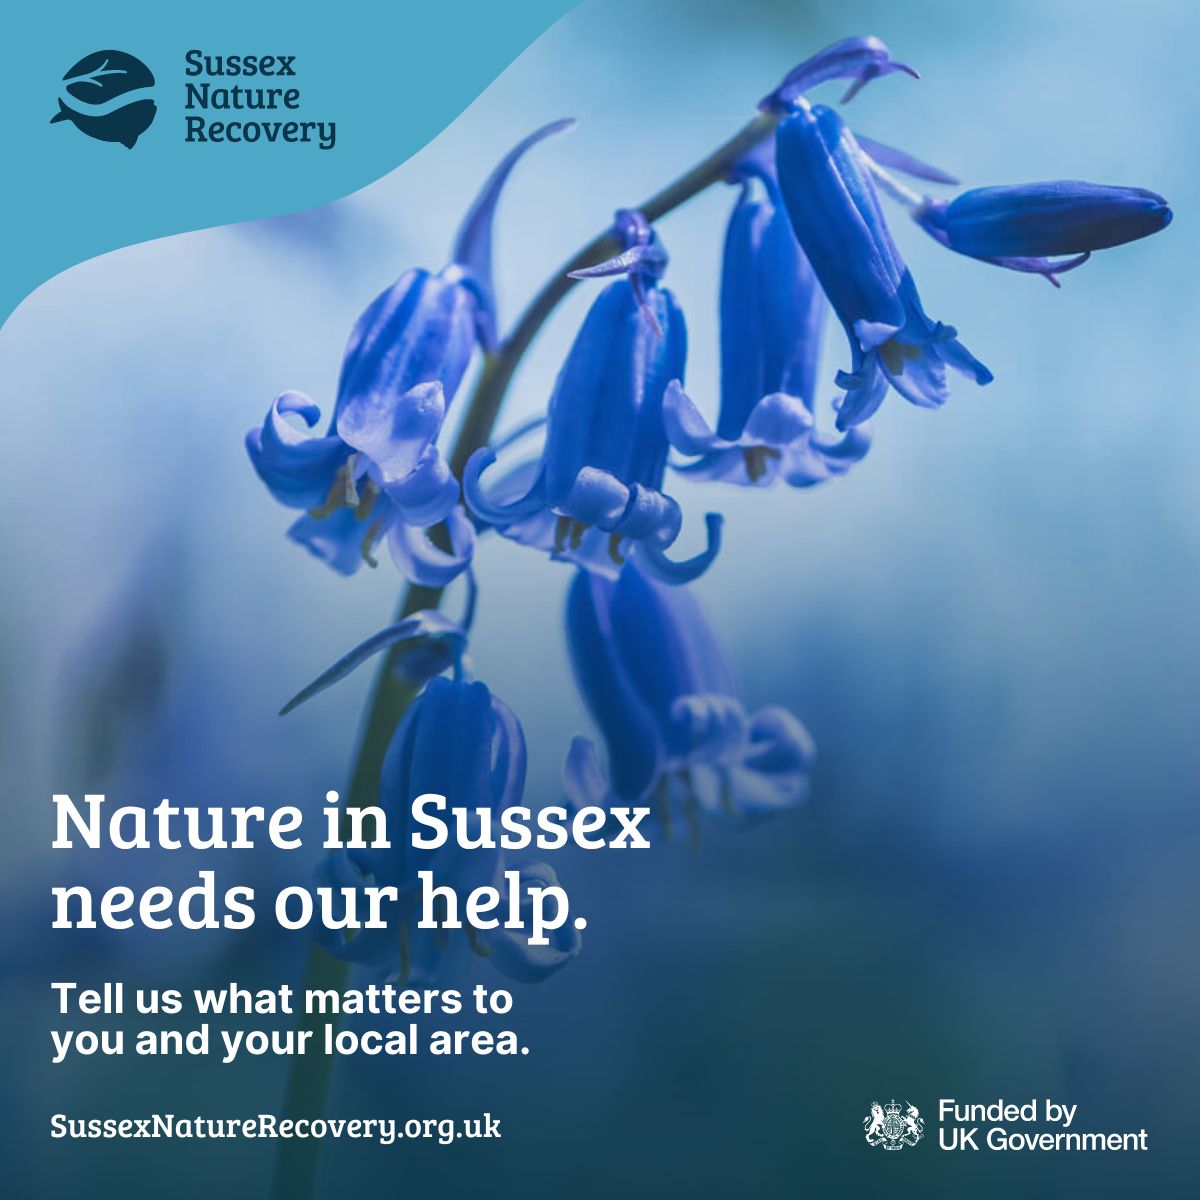 Live in Sussex? Have your say to help nature recover. 
Tell us about the local wildlife and places for nature you love by taking the public survey orlo.uk/Yh98V 
#WestSussexClimateAction